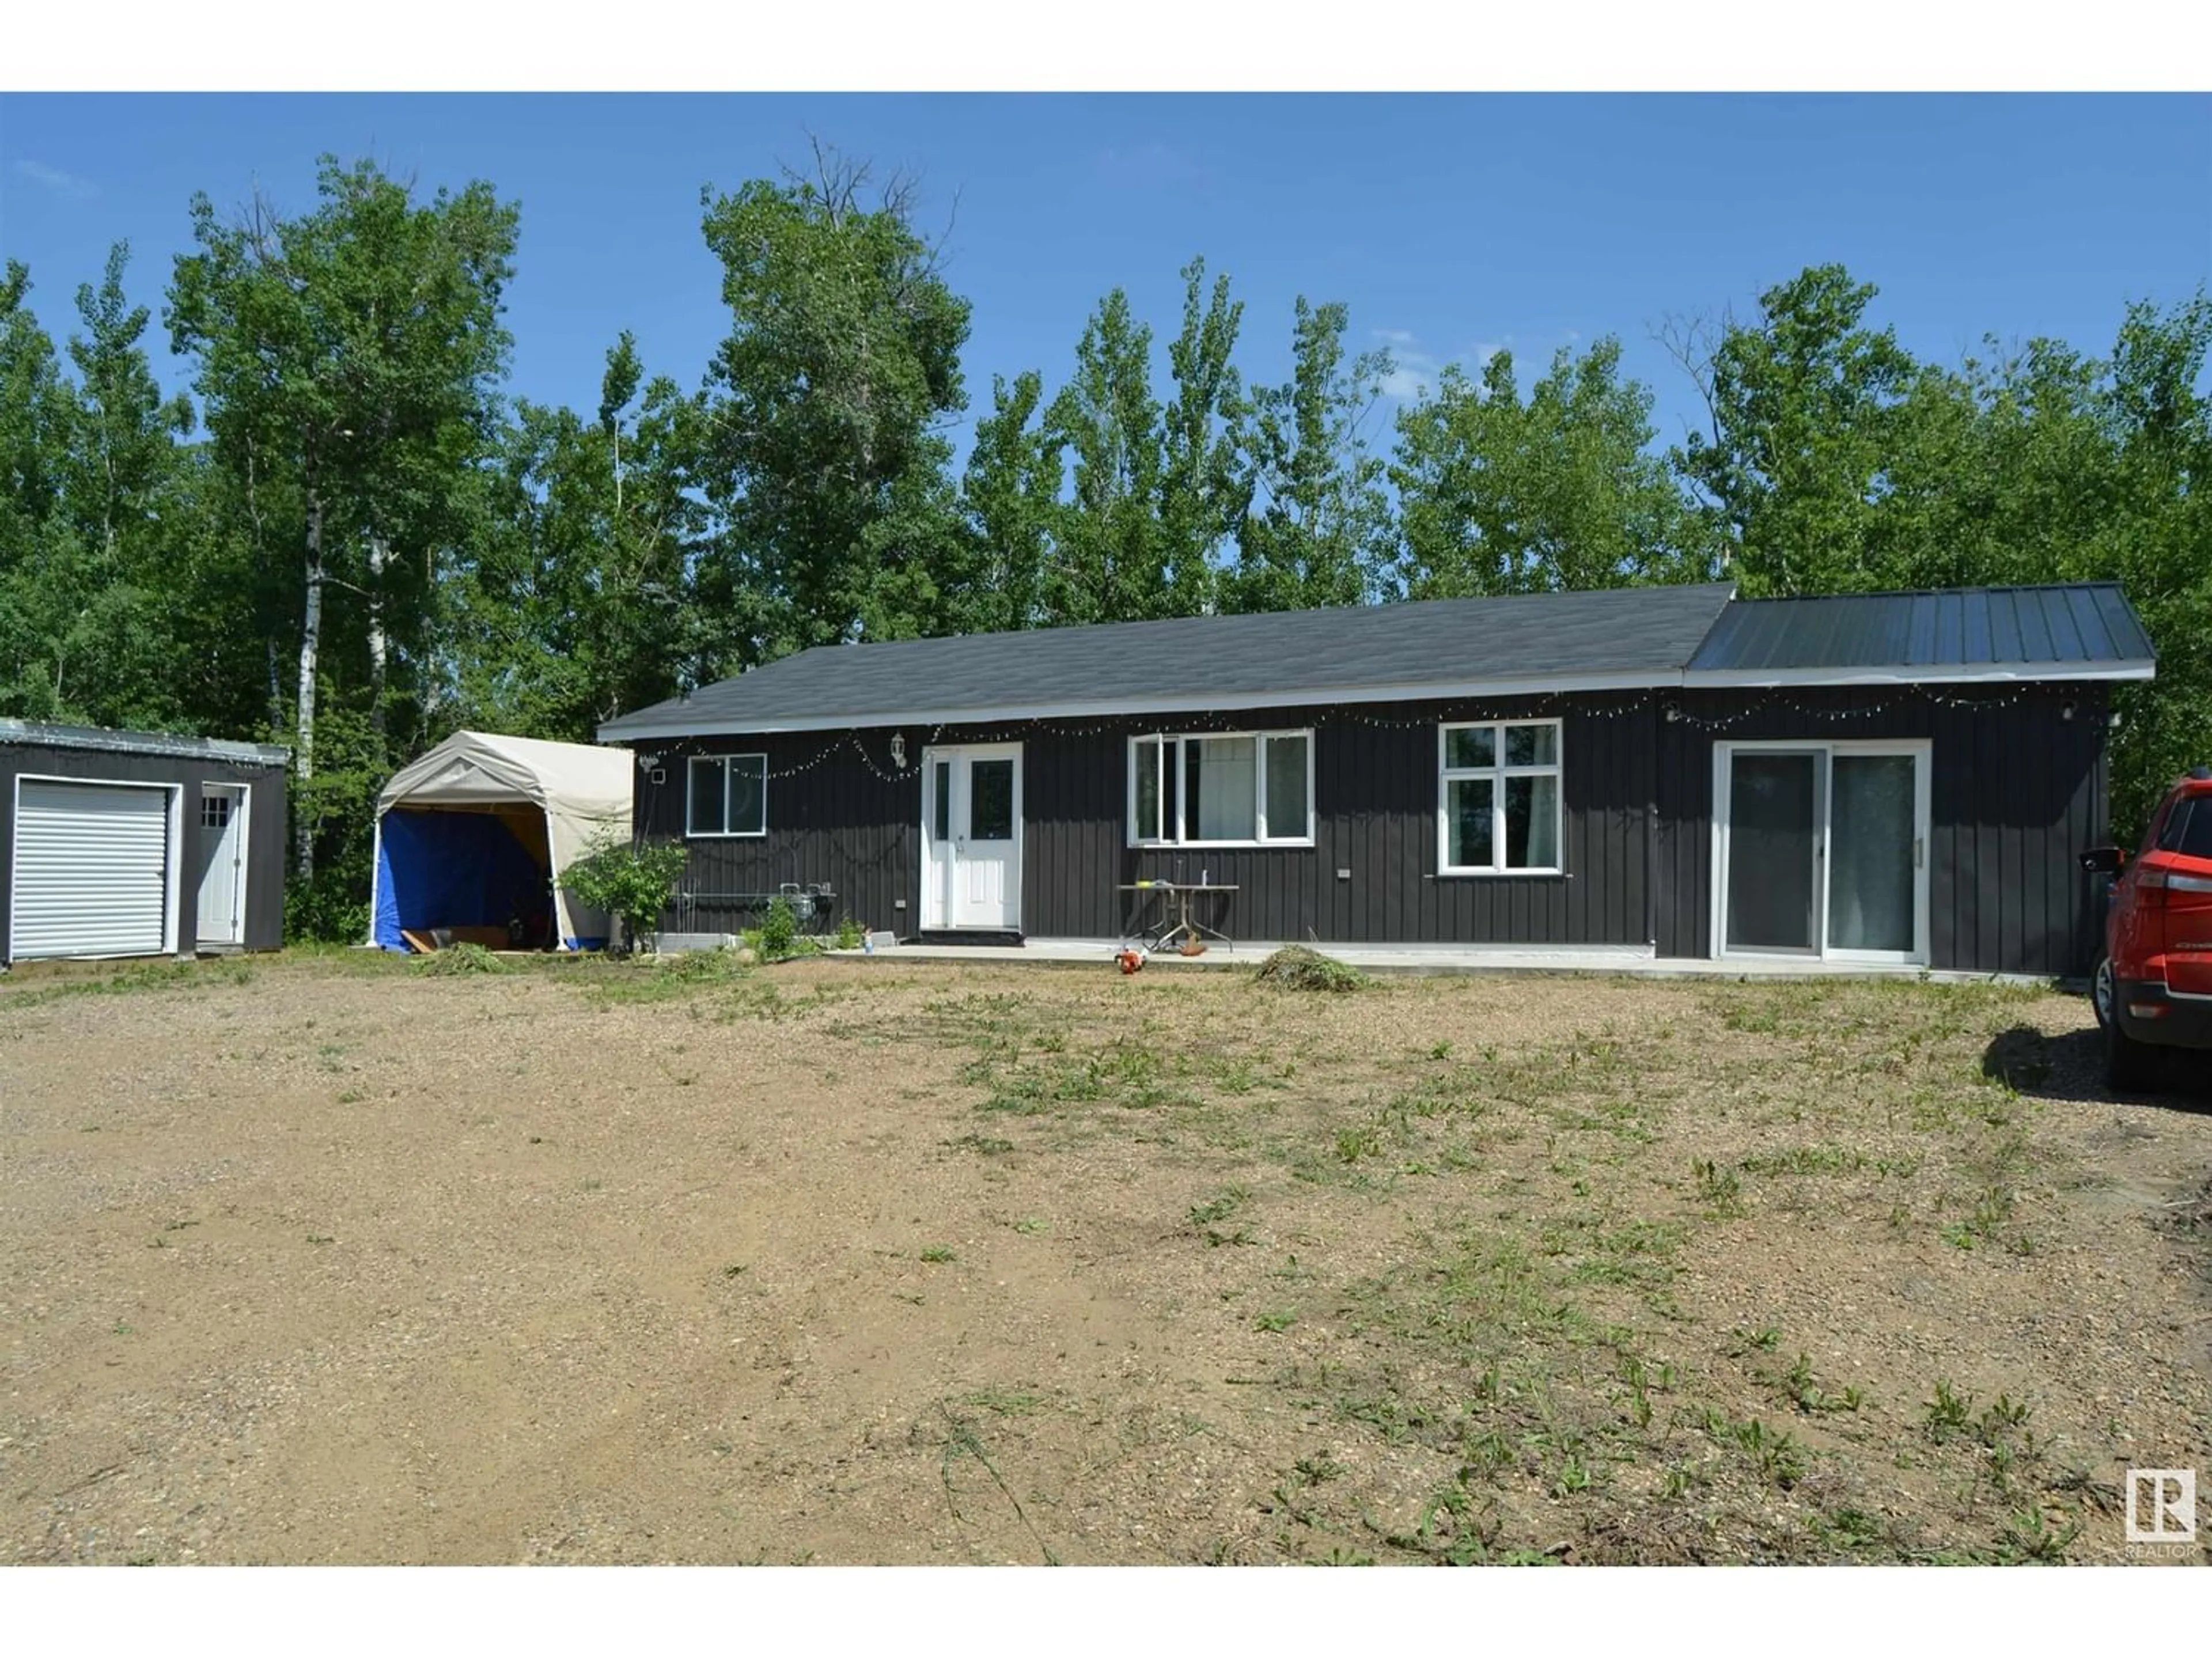 Cottage for #4 60203 Range Road 164, Rural Smoky Lake County Alberta T0A3C0